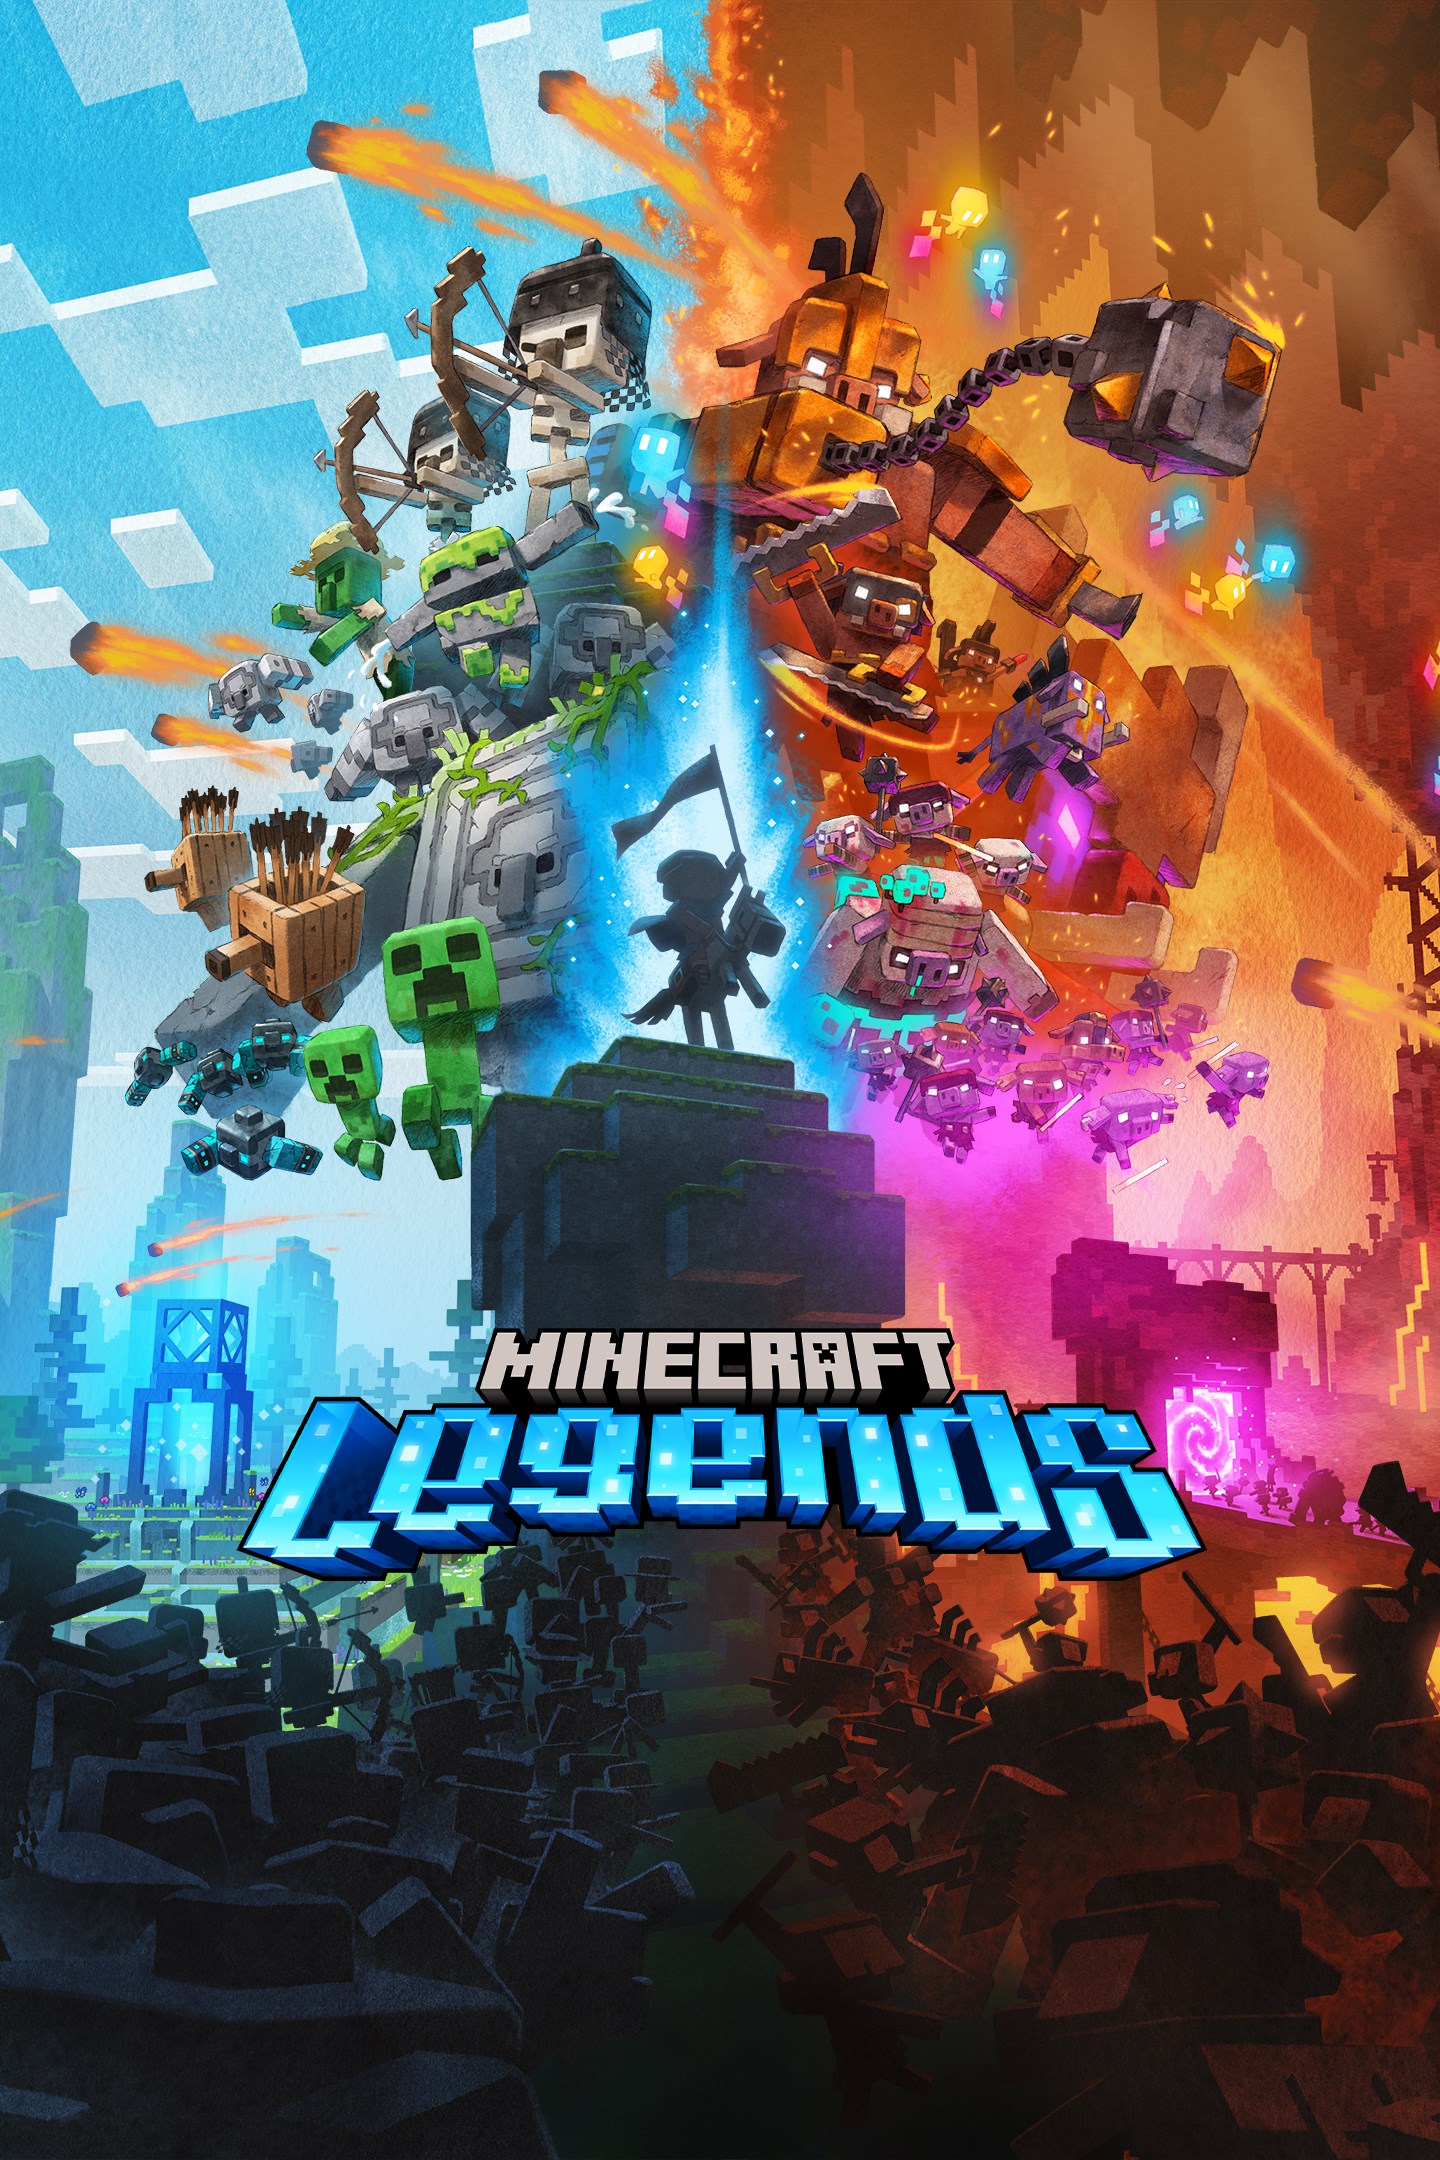 Is Minecraft Legends on Game Pass?